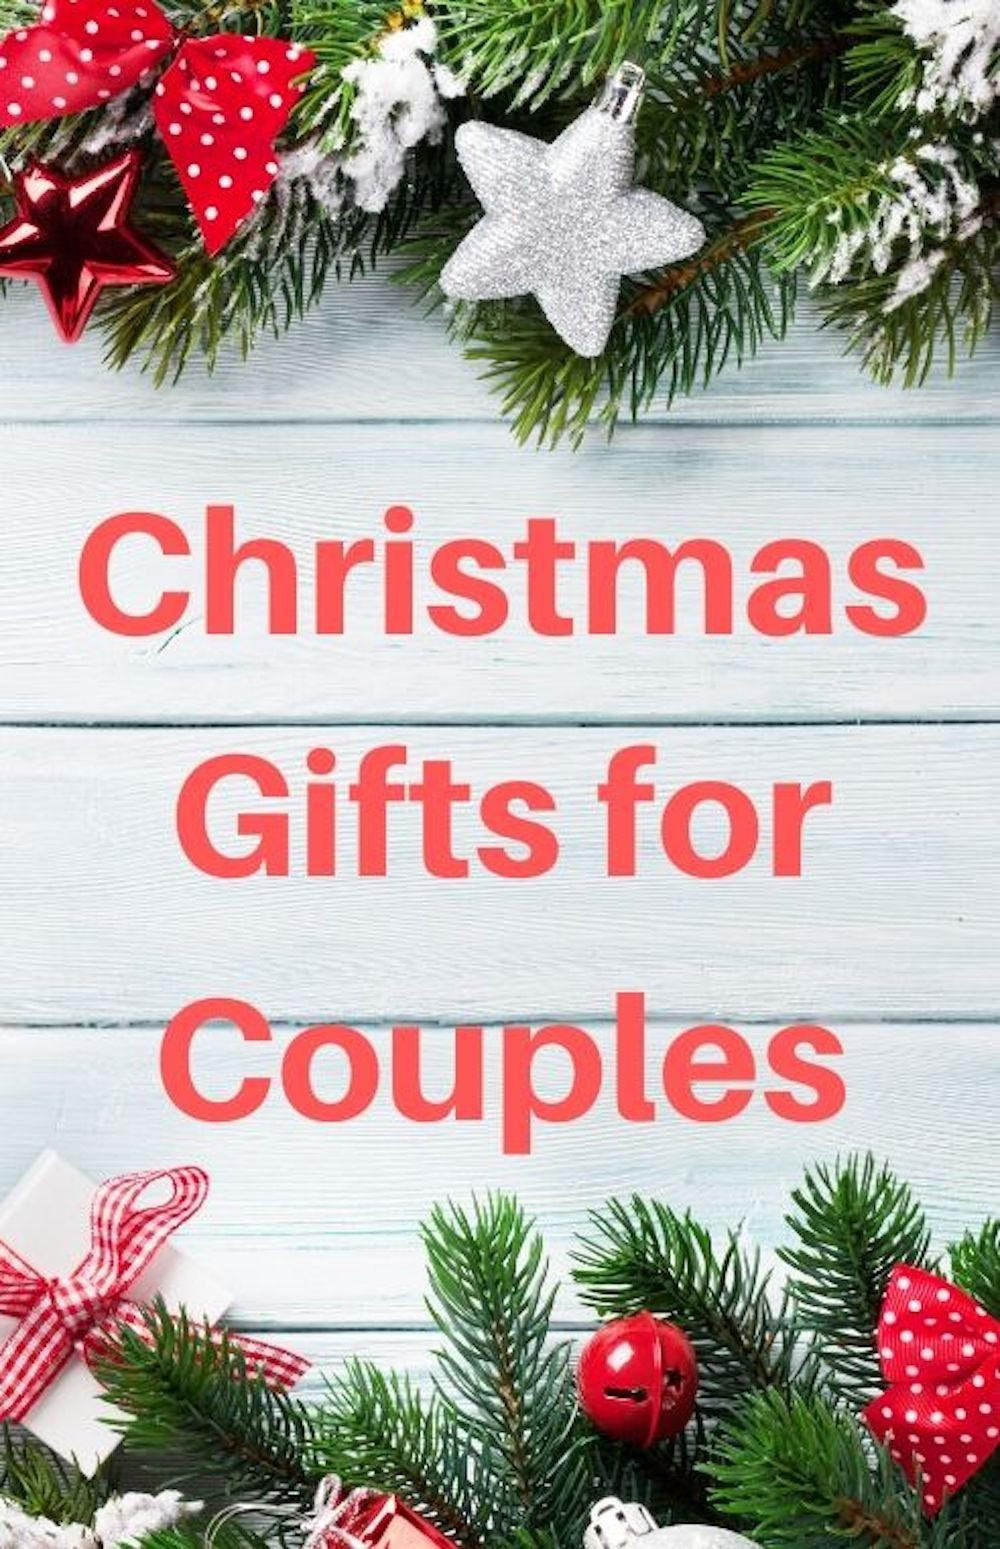 Couples Xmas Gift Ideas
 Christmas Gift Ideas for Couples